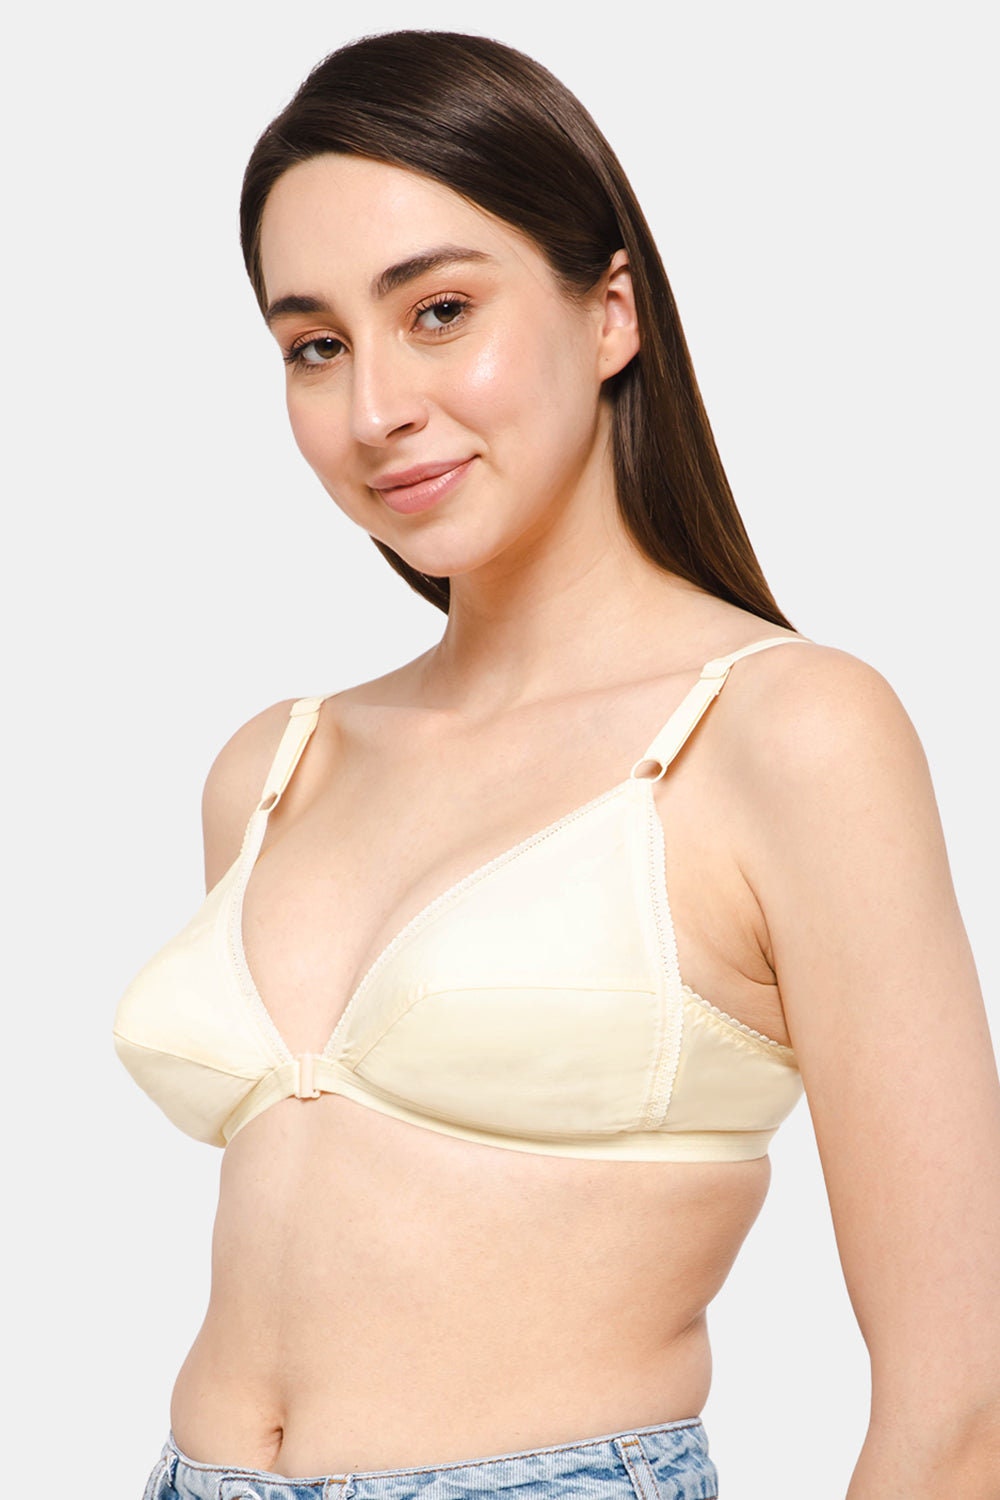 Playtex Women's Plus Size Front-Close Bra with Flex Back,Light Beige,36C at   Women's Clothing store